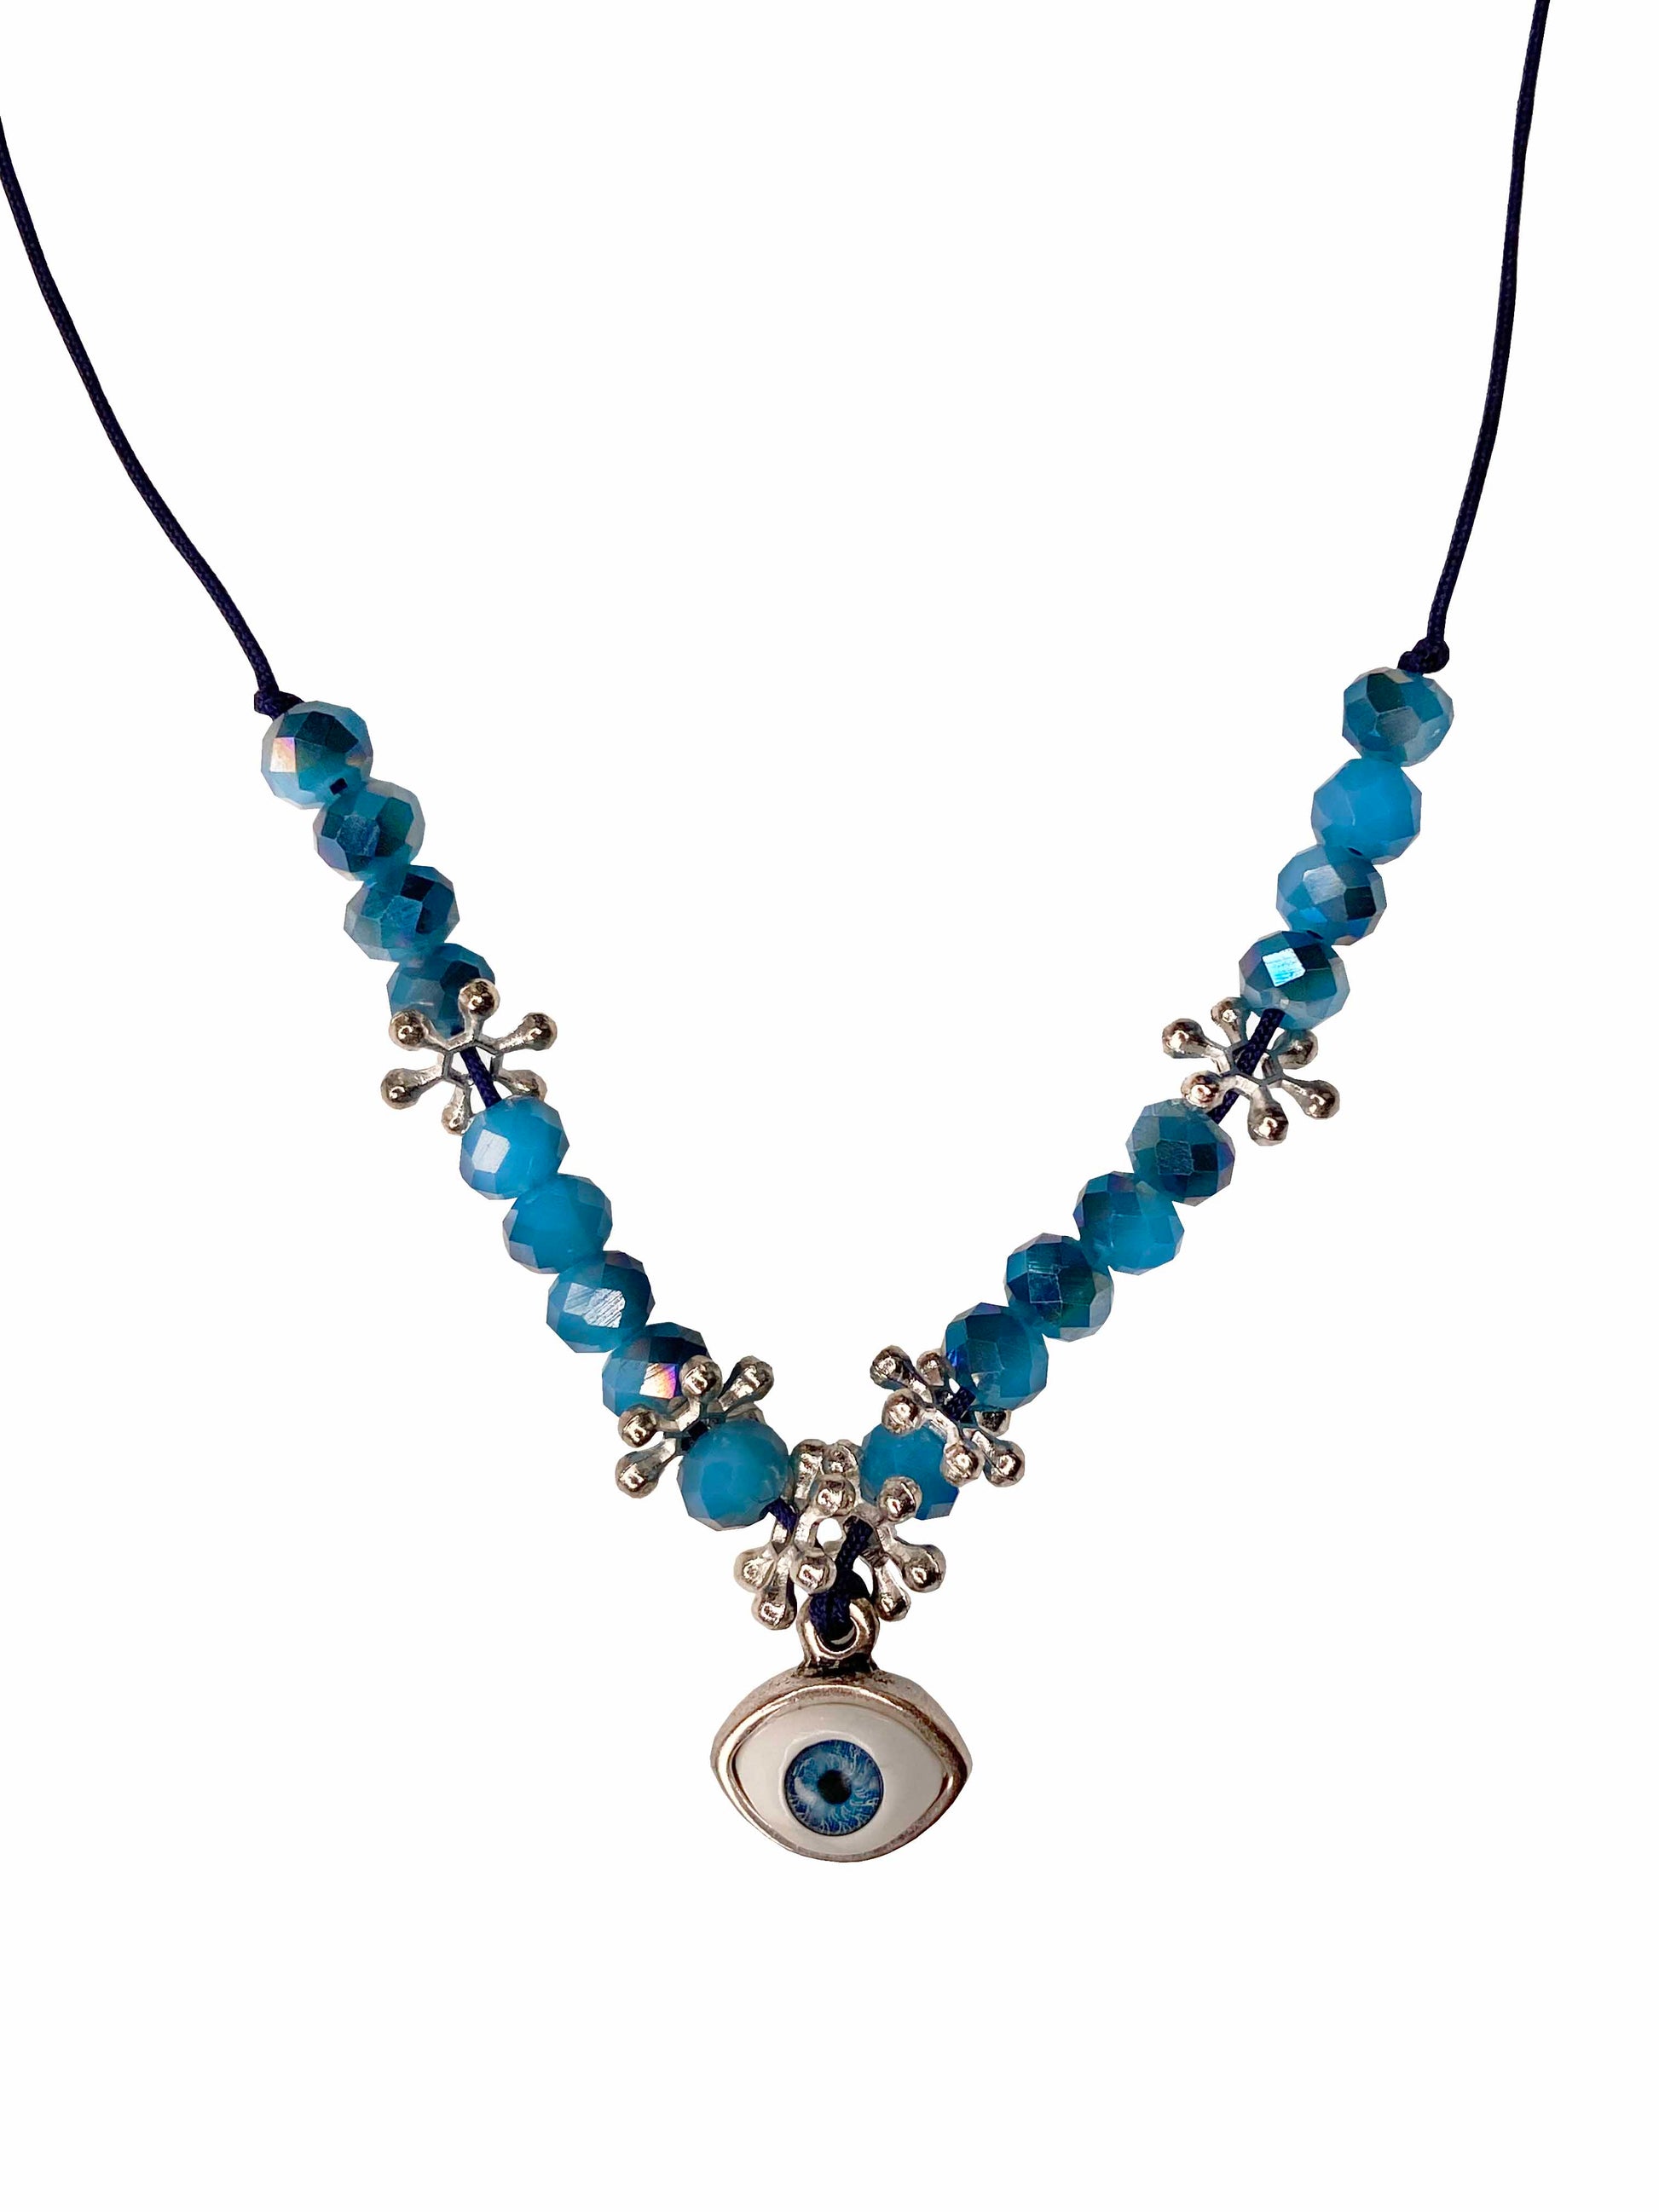 Handcrafted blue crystal and silver flower beaded necklace with silver backed evil eye charm.